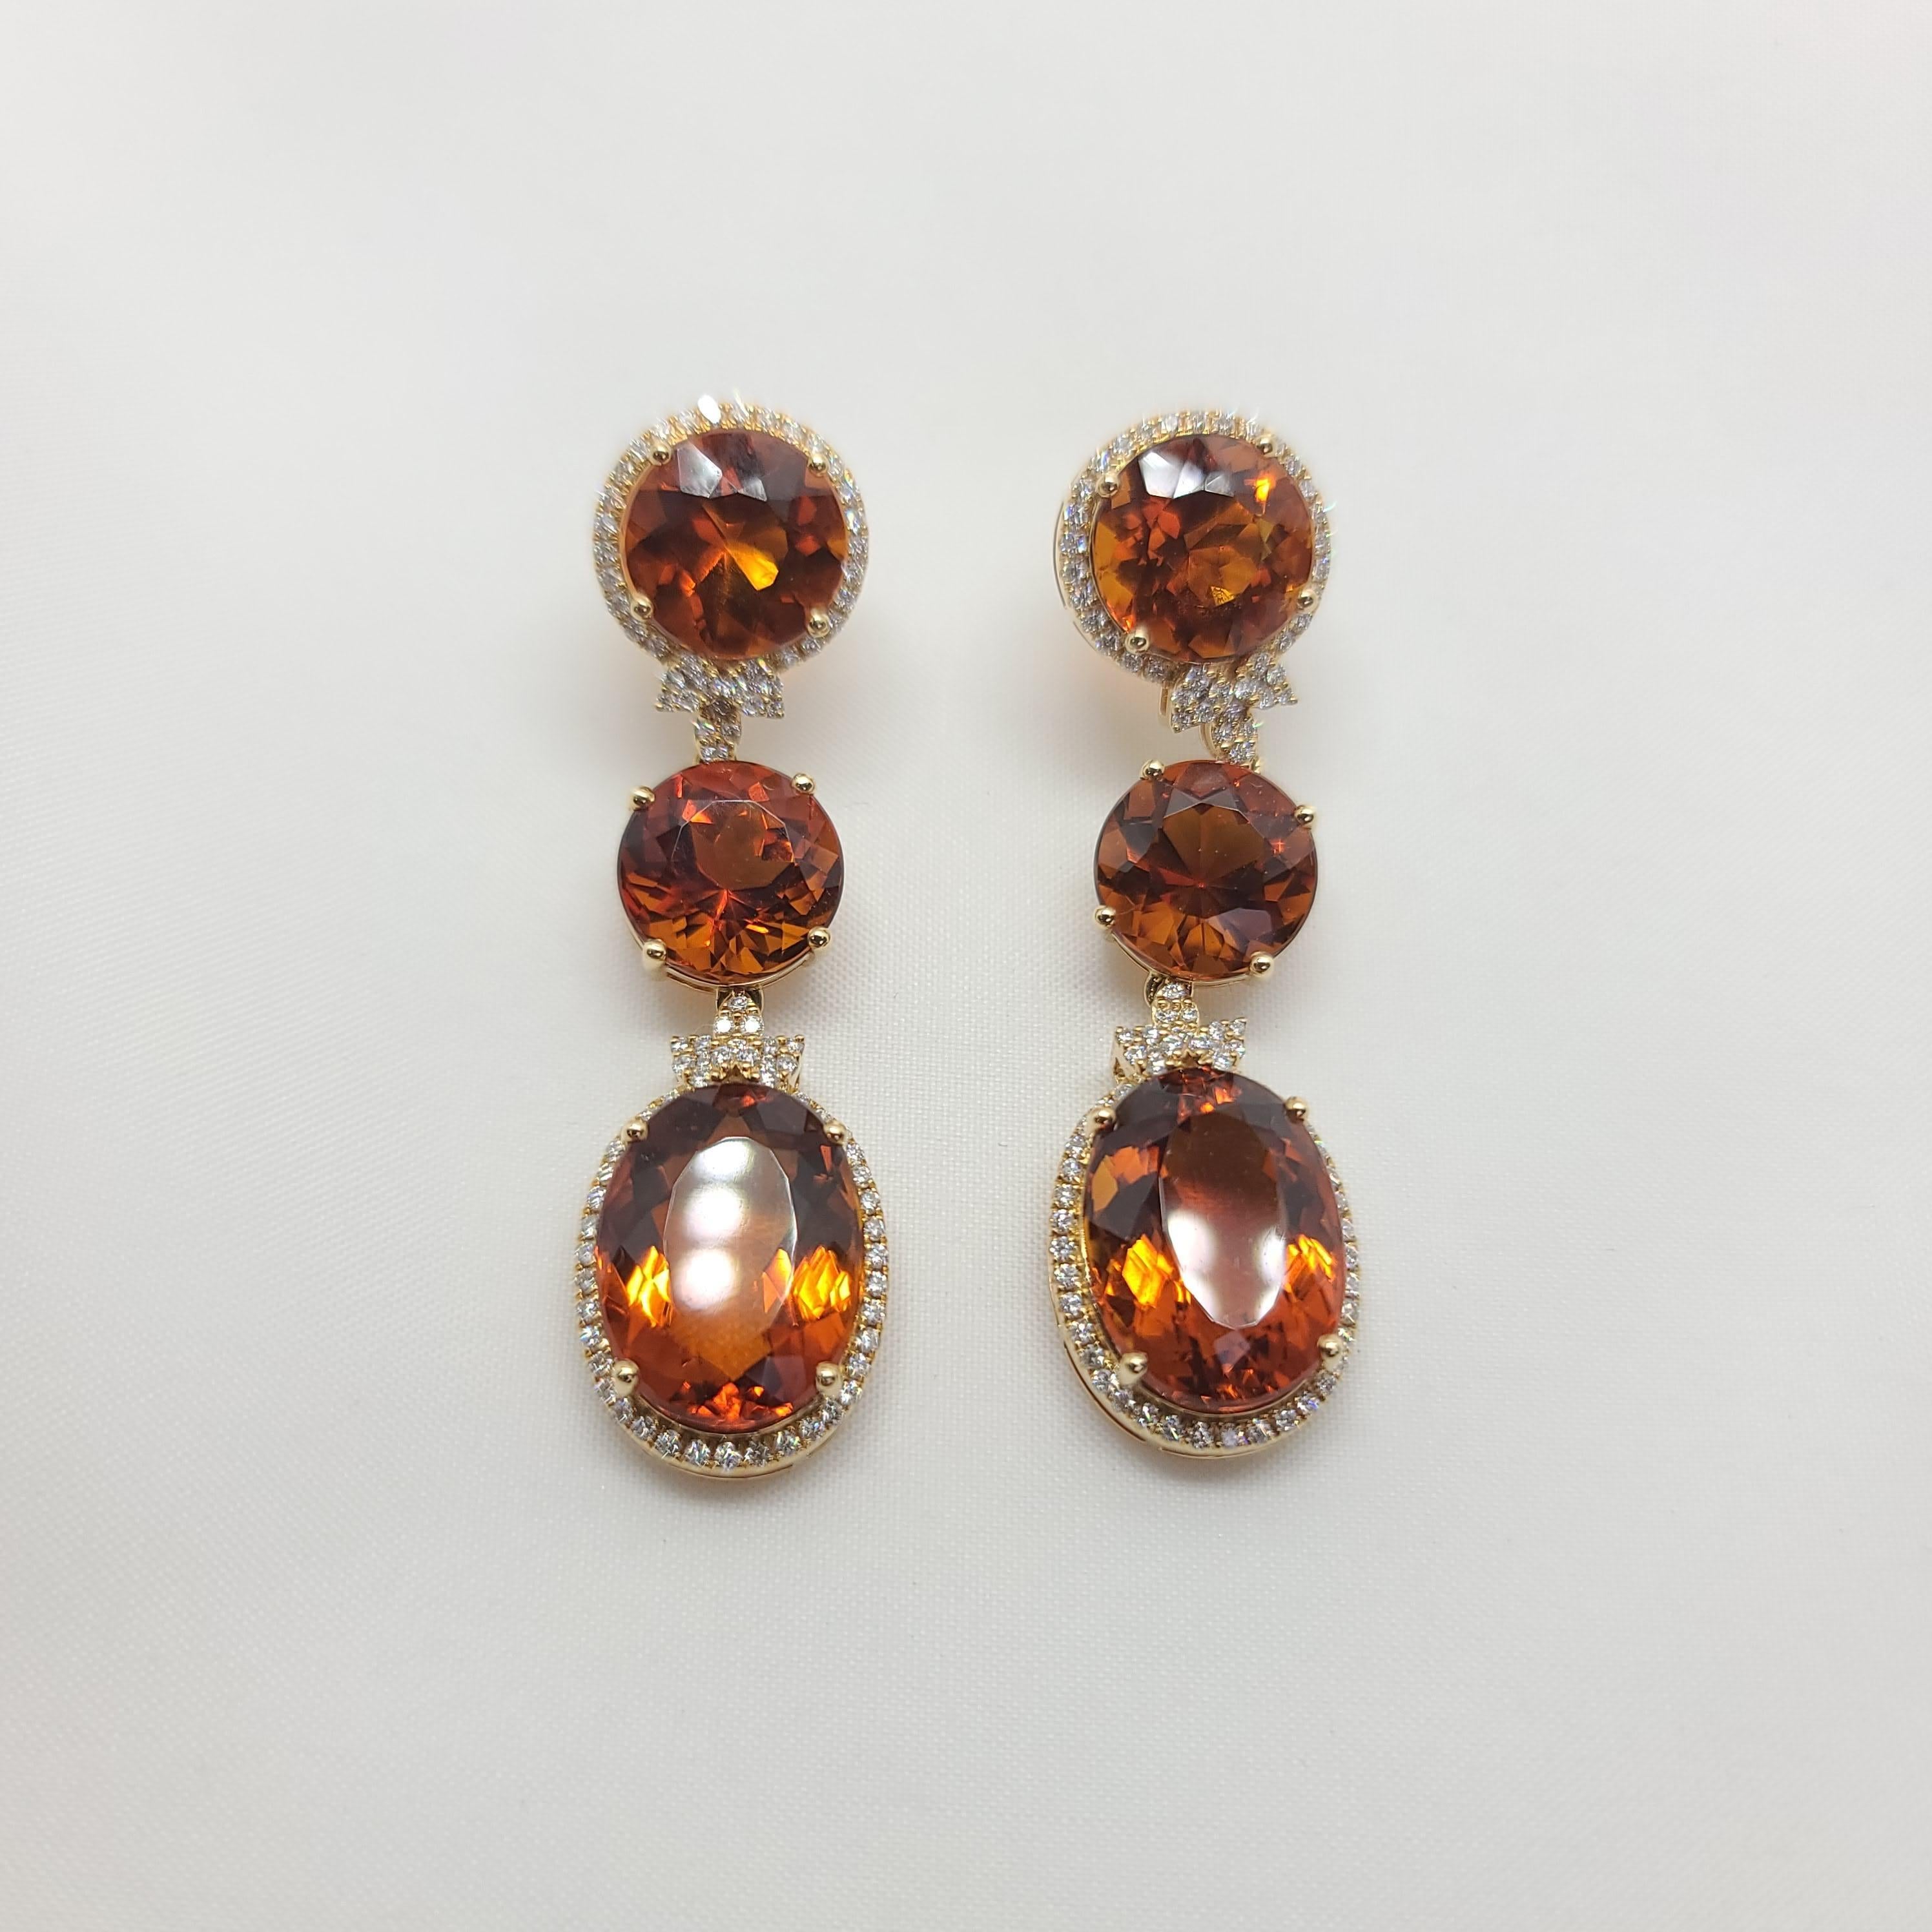 18K Yellow Gold Earrings with FIRE Citrine and Diamonds 
18KY - 14.31 gm
184 Round Diamonds - 1.11 
Natural Stone - Pure Fire Citrine

Length - 2.2 inch / 5.5 CM 